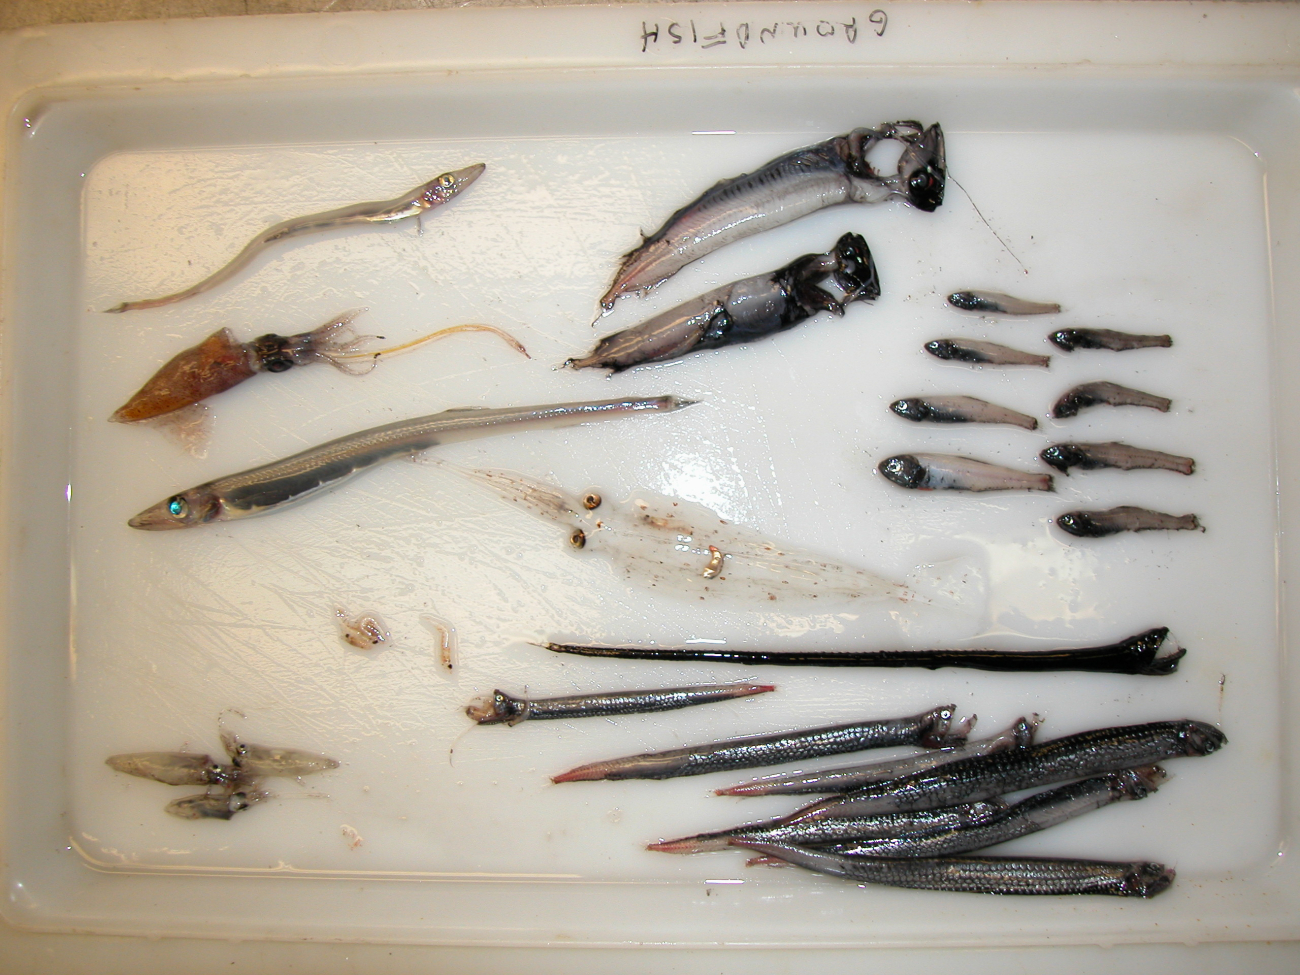 Mid-water fish and squid